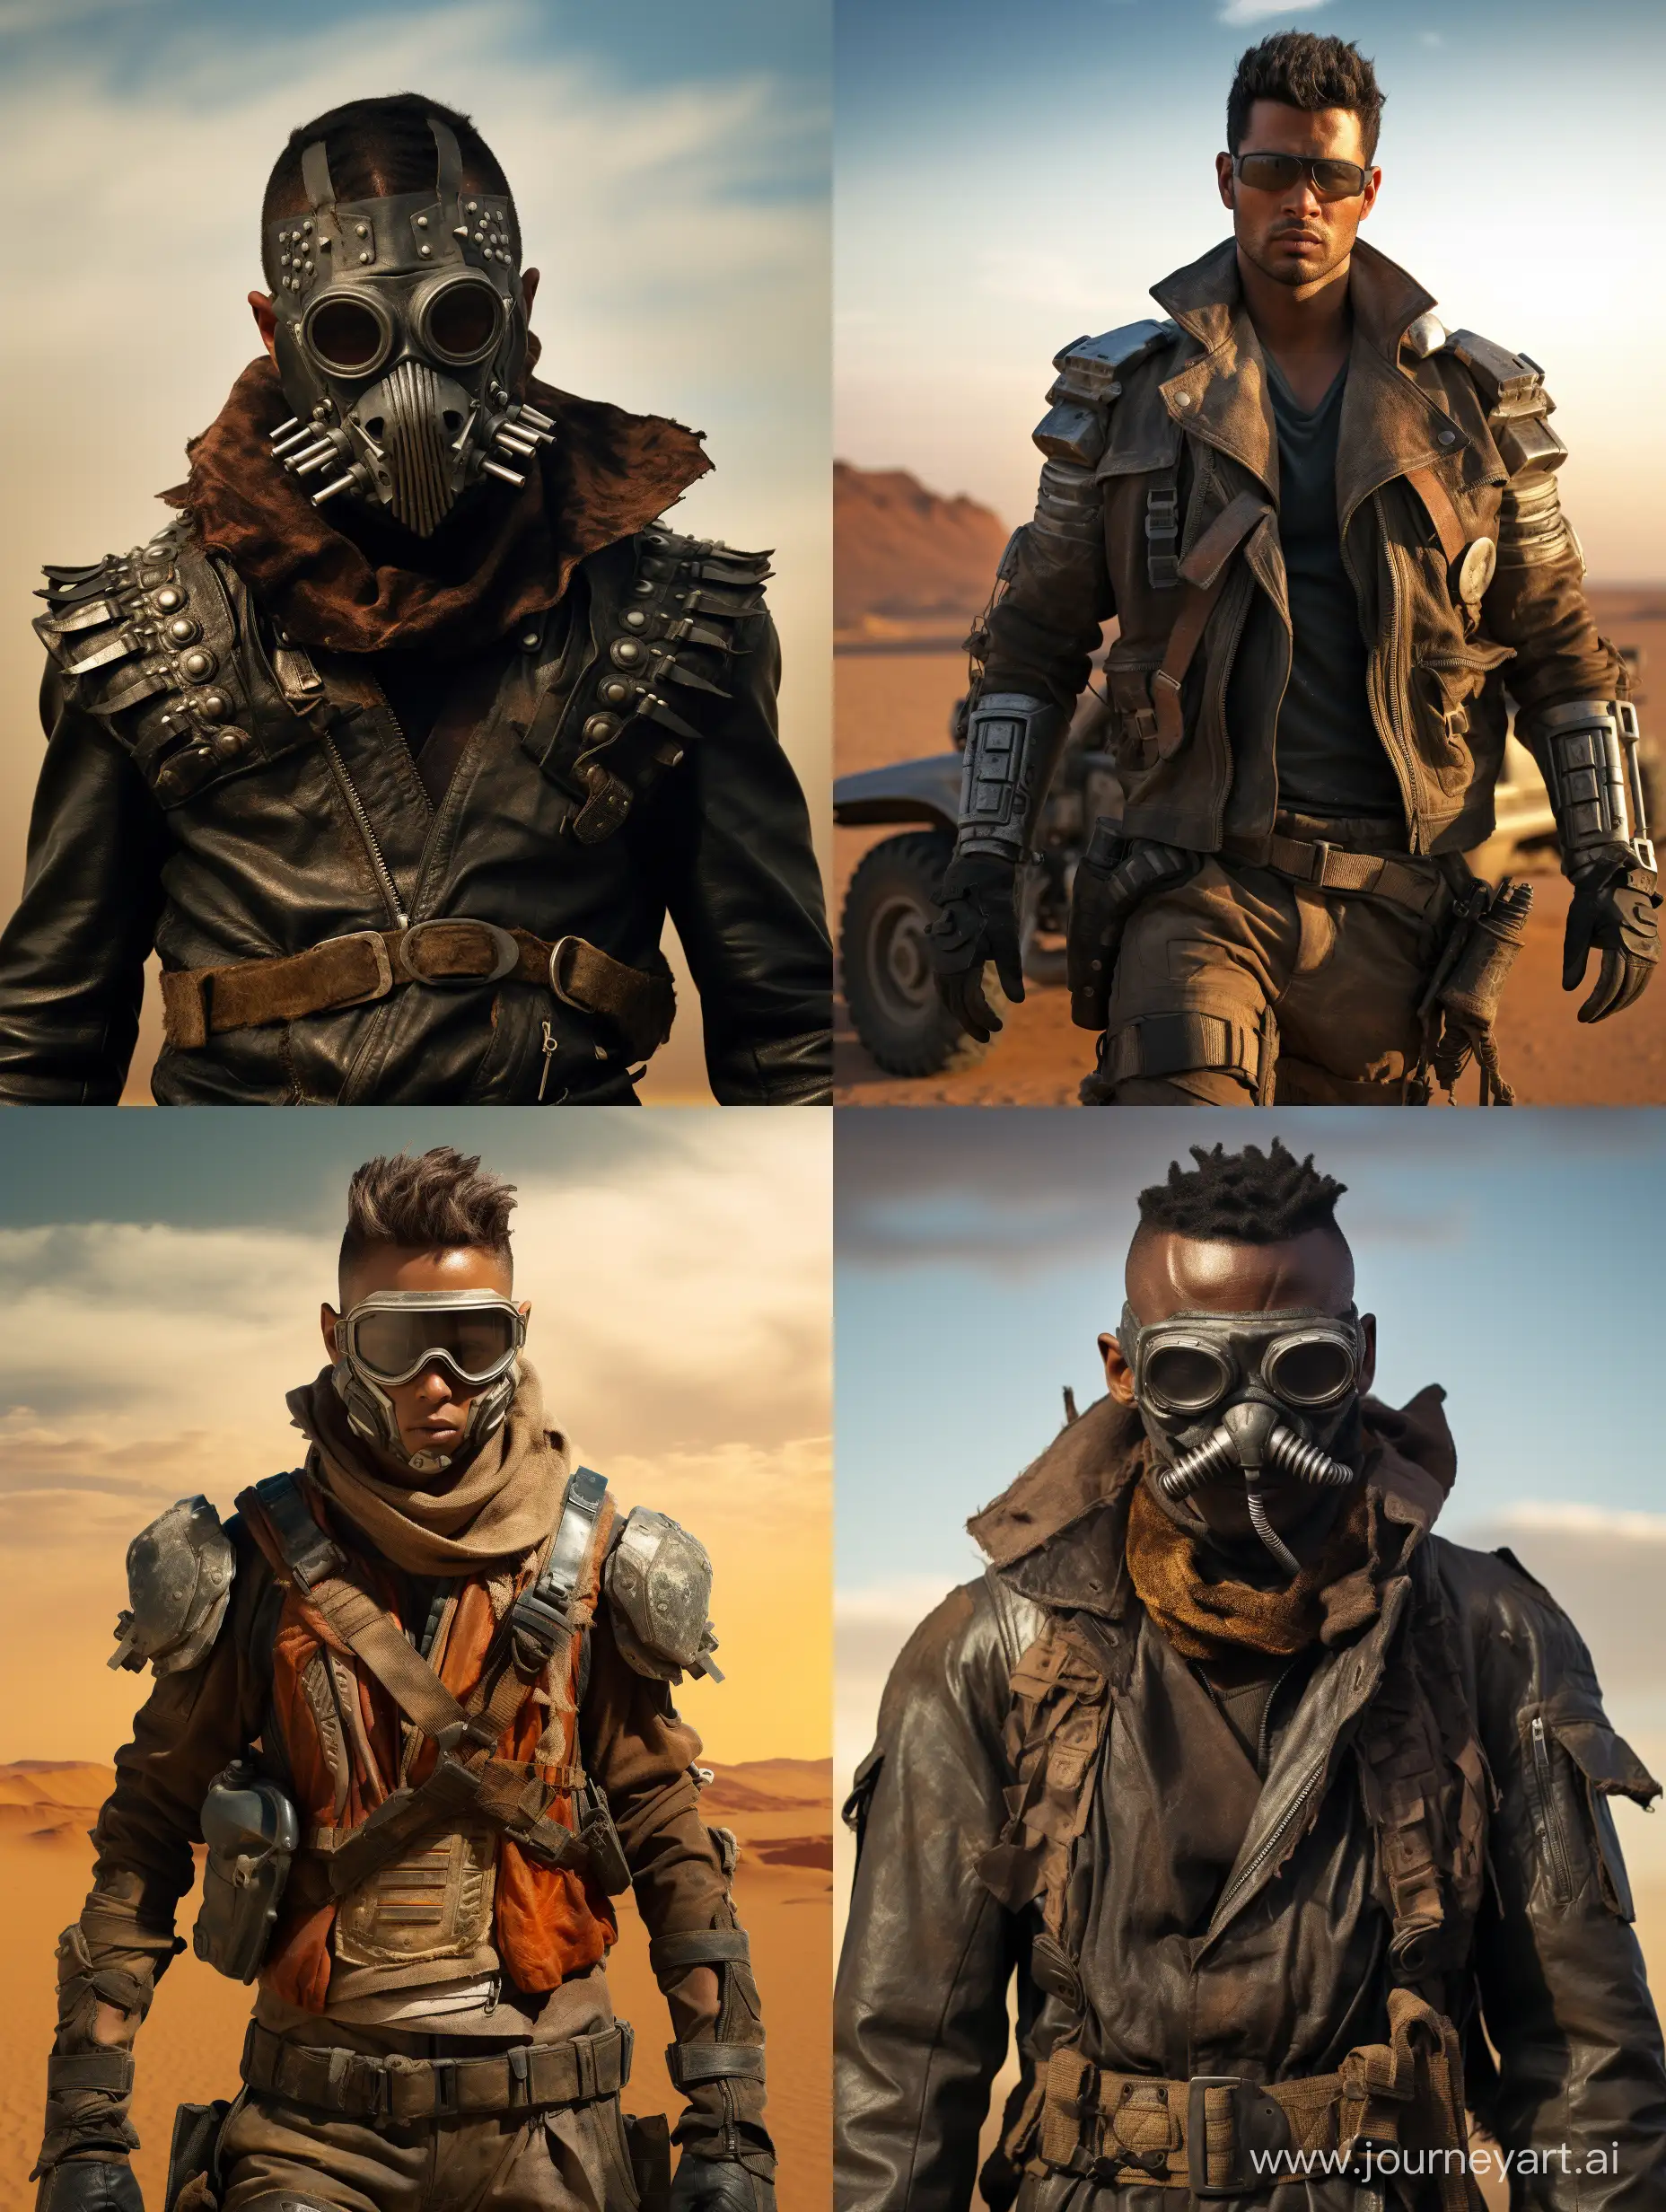 Generate an image with the following specifications:
- Environment: desert
- Background: desert Studio backdrop
- Style: Editorial Prada Streetwear Campaign x Madmax
- Photography Type: Close-up portrait movement
- Theme: Madmax fury road
- Visual Filters: Fashion Film Look-Up Table (LUT)
- Camera Effects: Camera Blur, Camera Haze
- Time: Madmax theme
- Resolution: High
- Aspect Ratio: 4:5 (vertical)
- Key Element: Inflatable technical textile
- Details: Include intricate details on the technical textile
